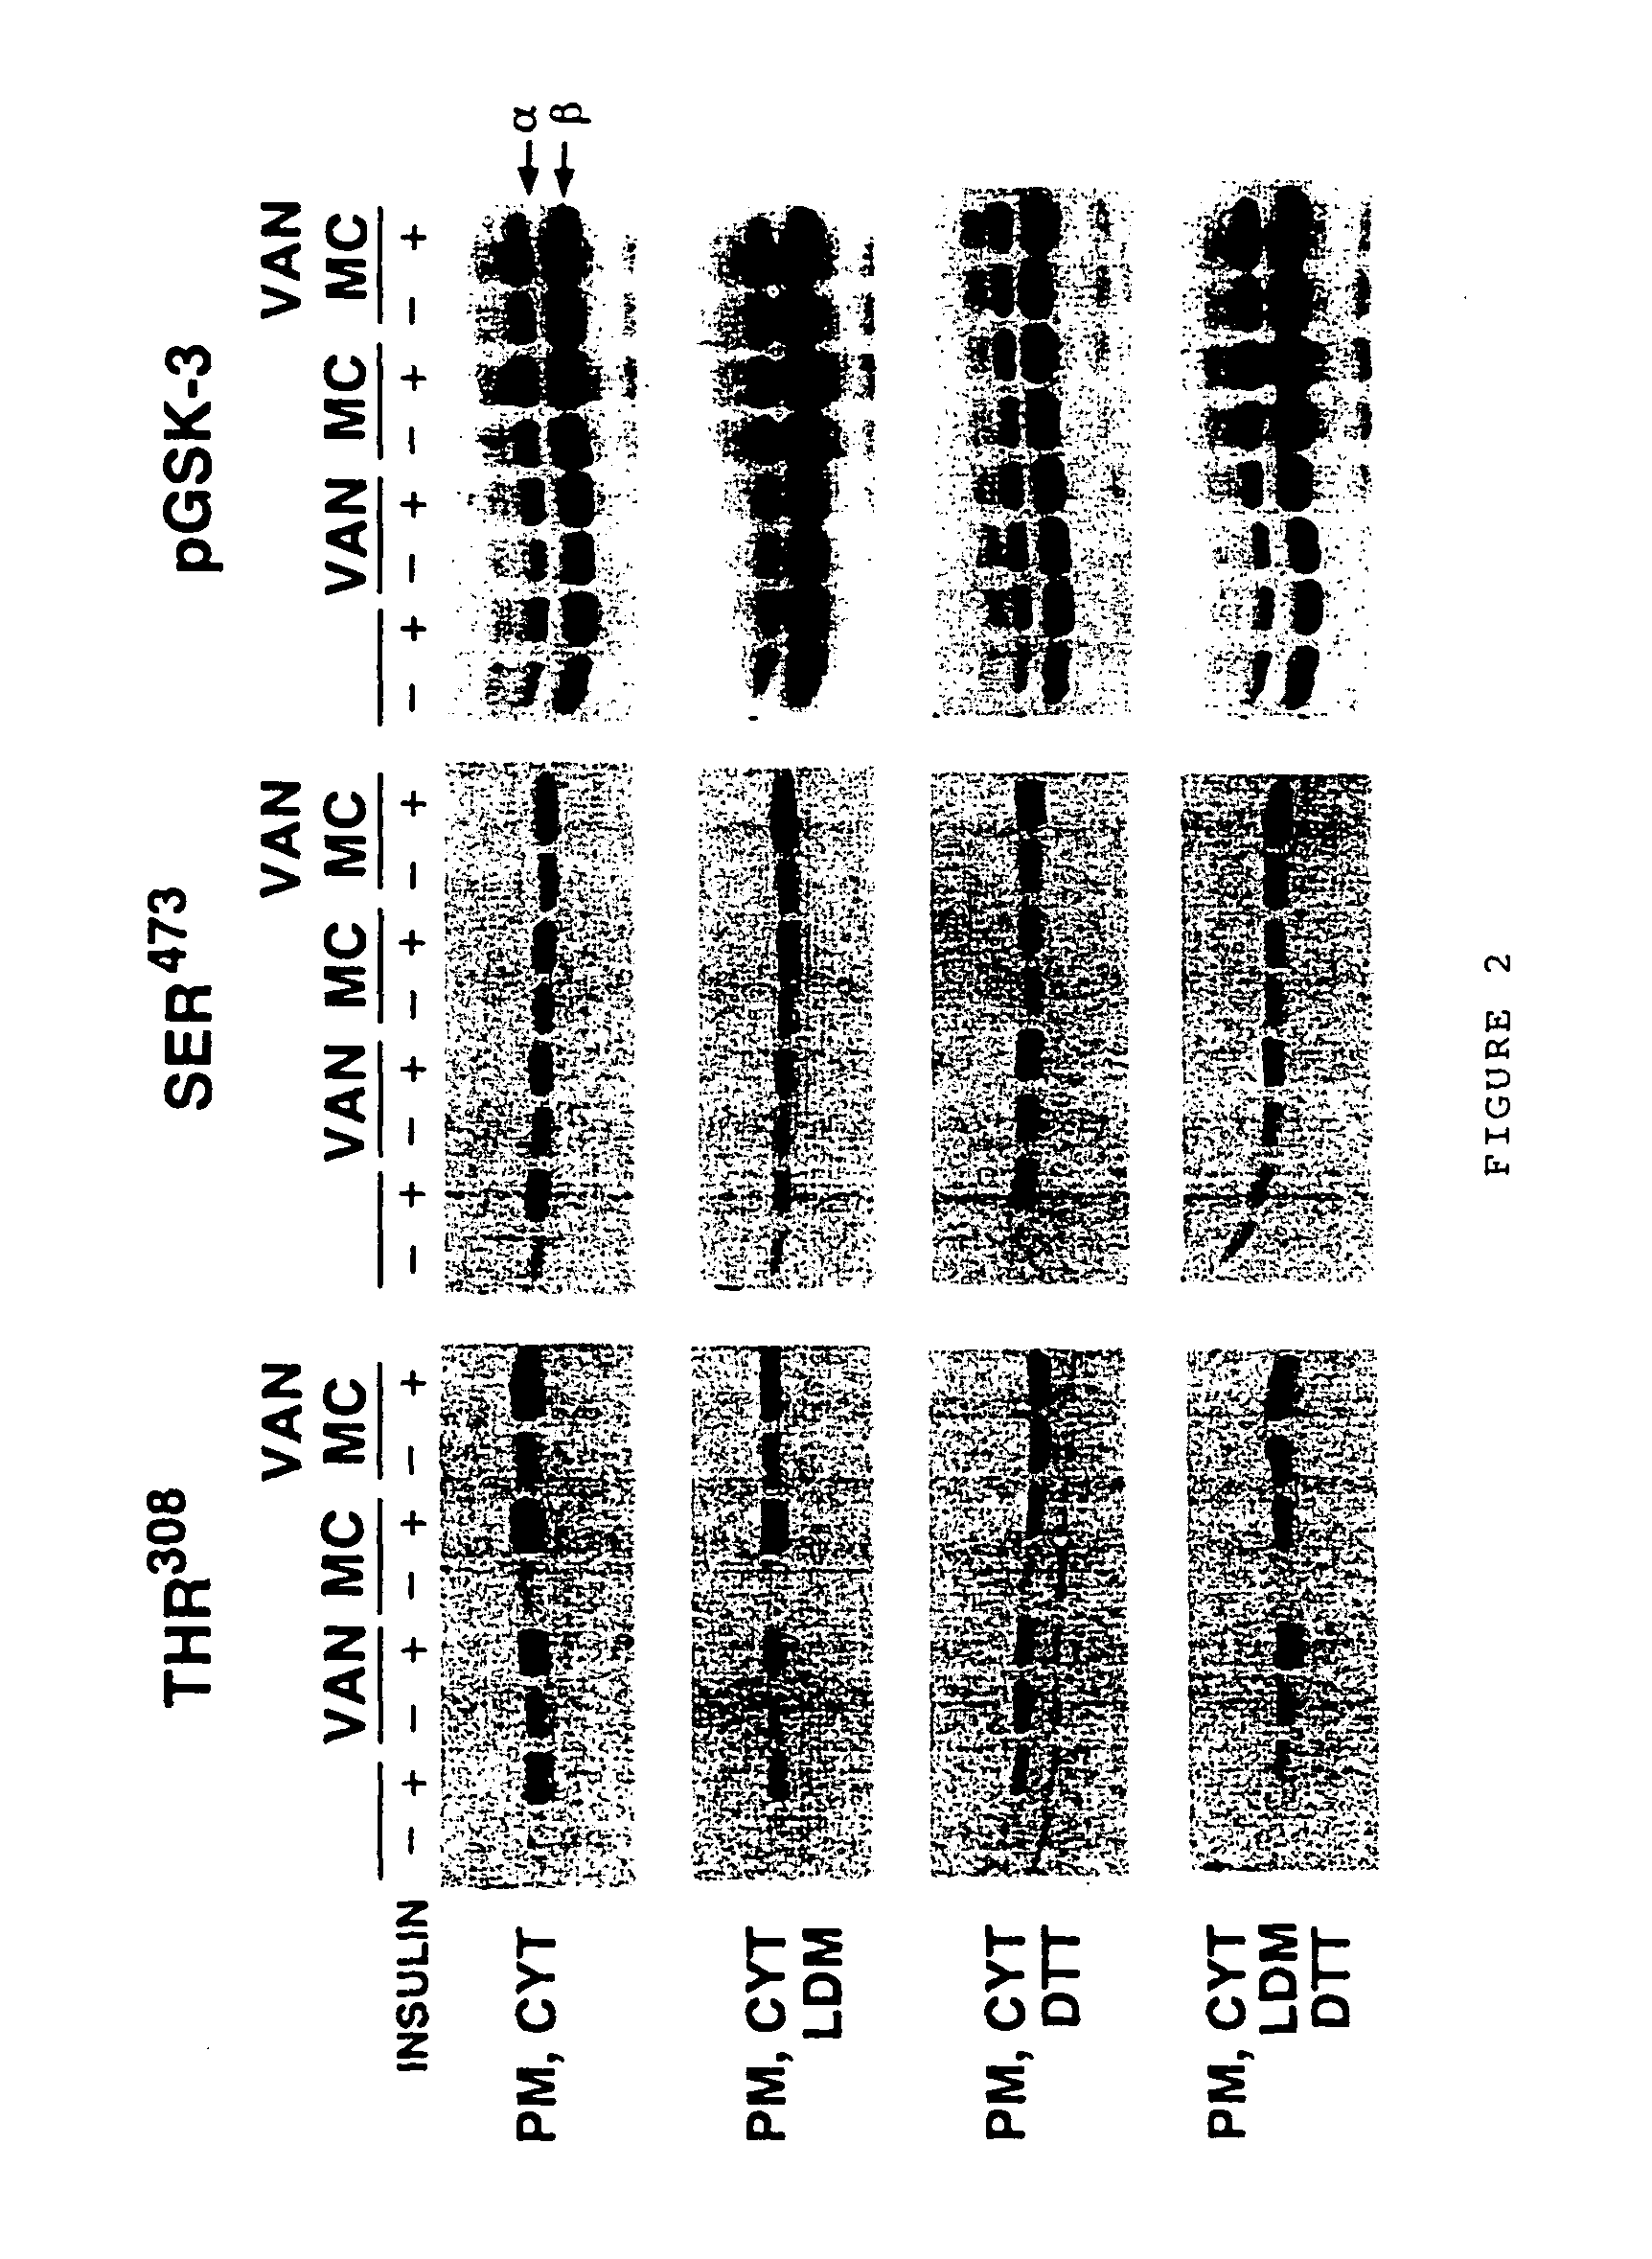 Cell-free assay for insulin signaling